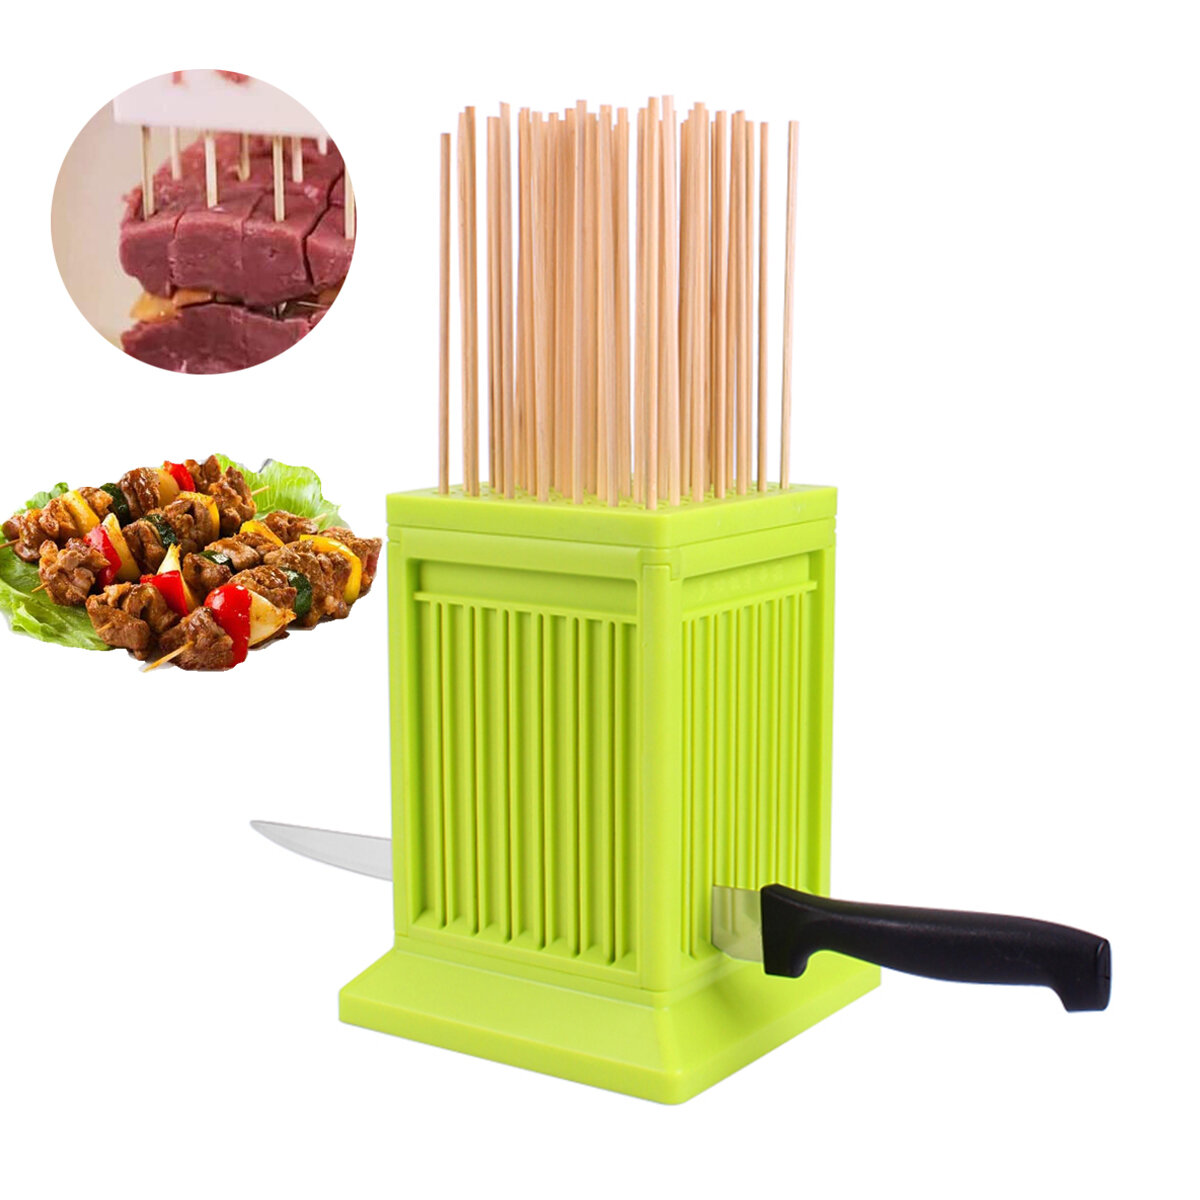 49 Holes BBQ Kebab Maker Meat Skewer Box Barbecue Machine Grill Barbecue Tools Camping Picnic